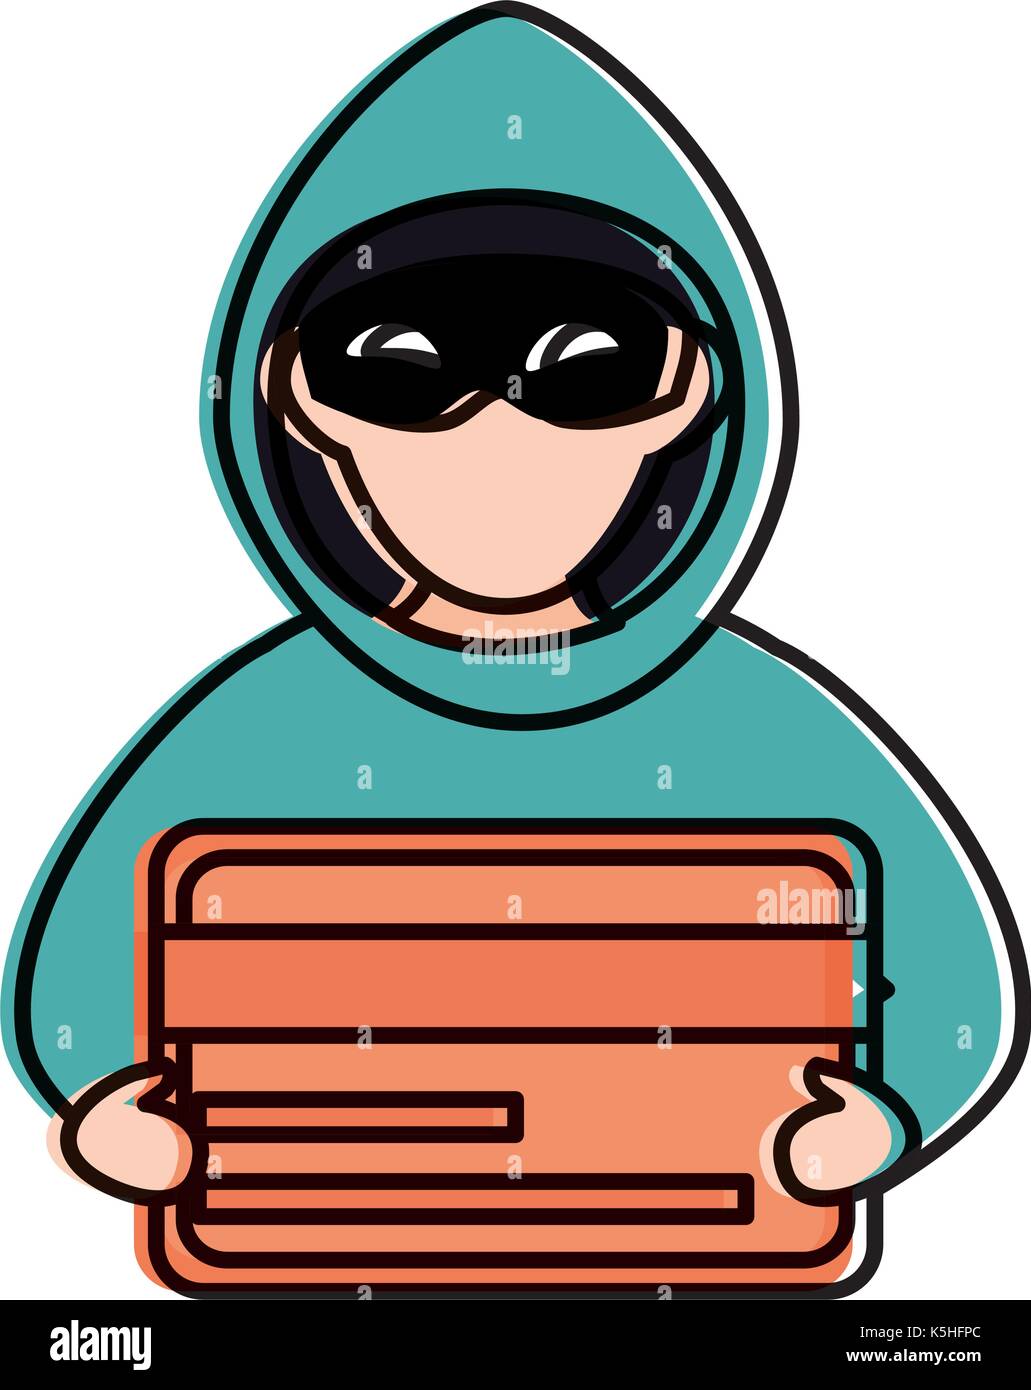 cyber thief avatar character with credit card vector illustration design Stock Vector